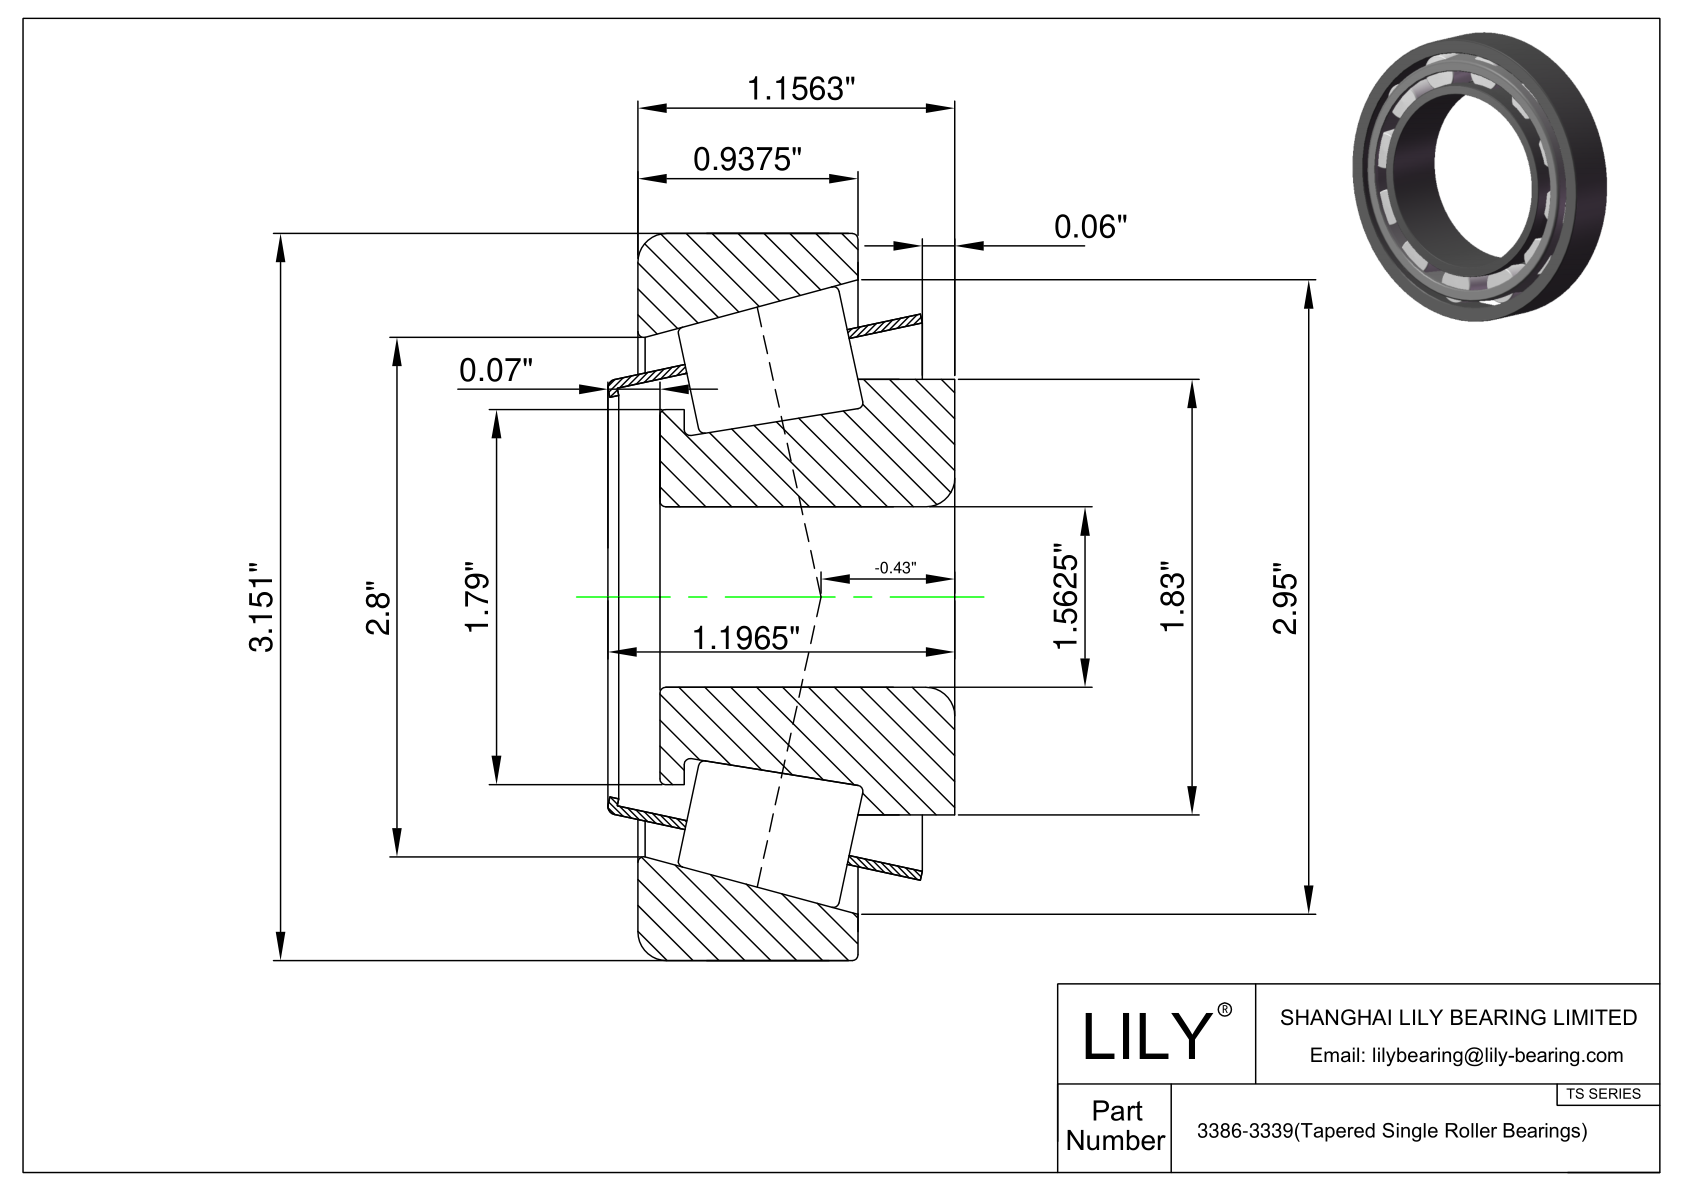 3386-3339 TS (Tapered Single Roller Bearings) (Imperial) cad drawing